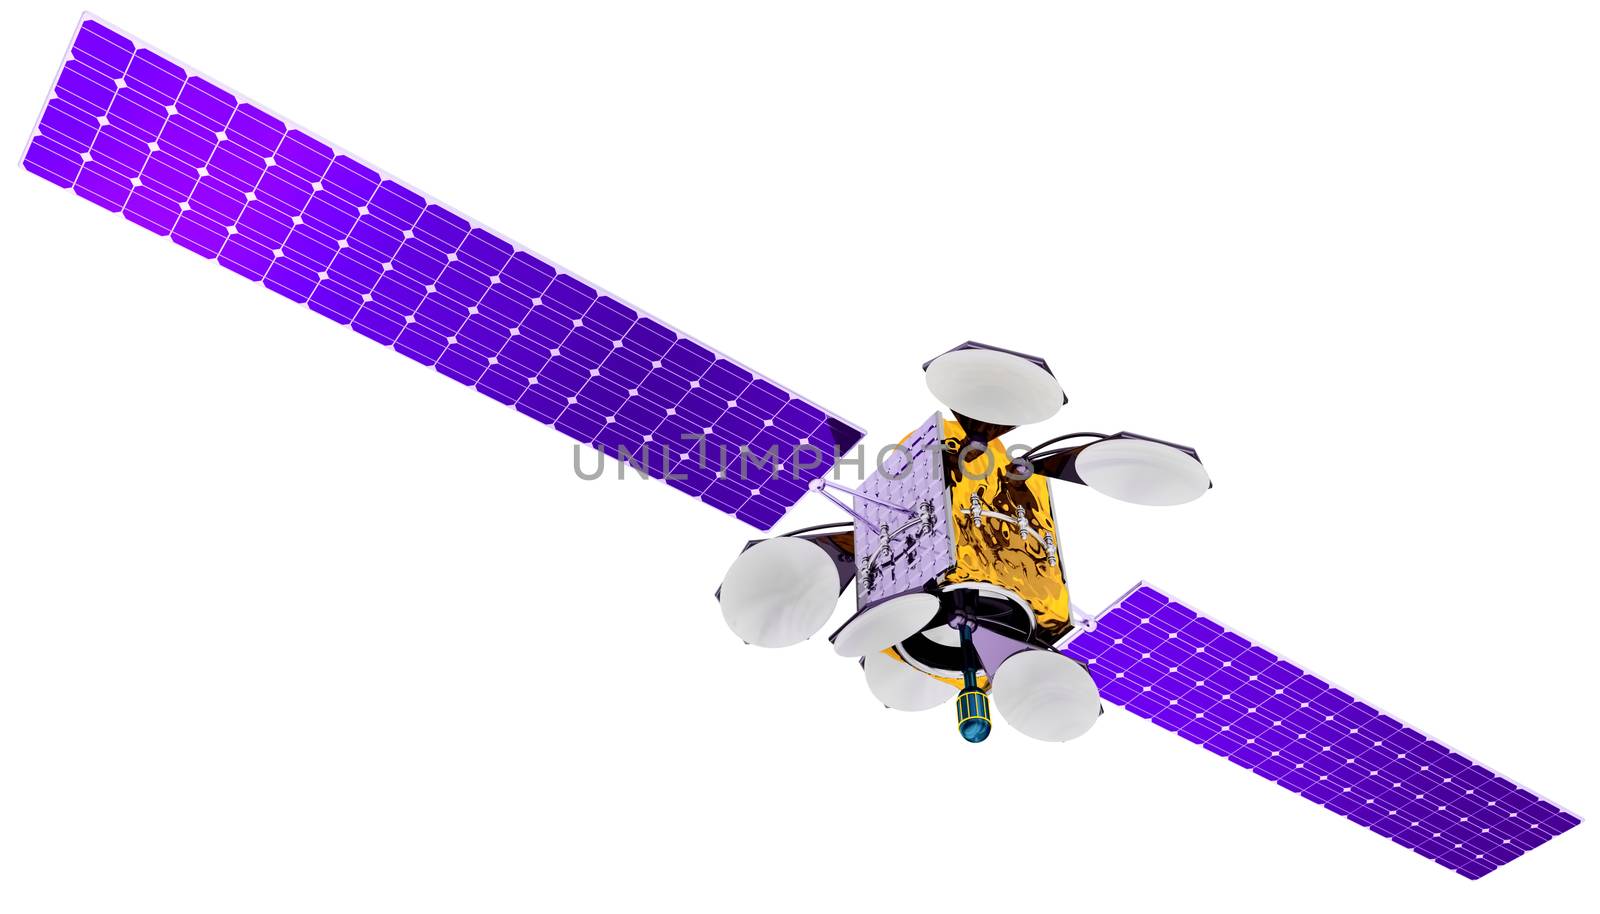 3D model of an artificial satellite of the Earth, equipped with solar panels and parabolic satellite communications antenna